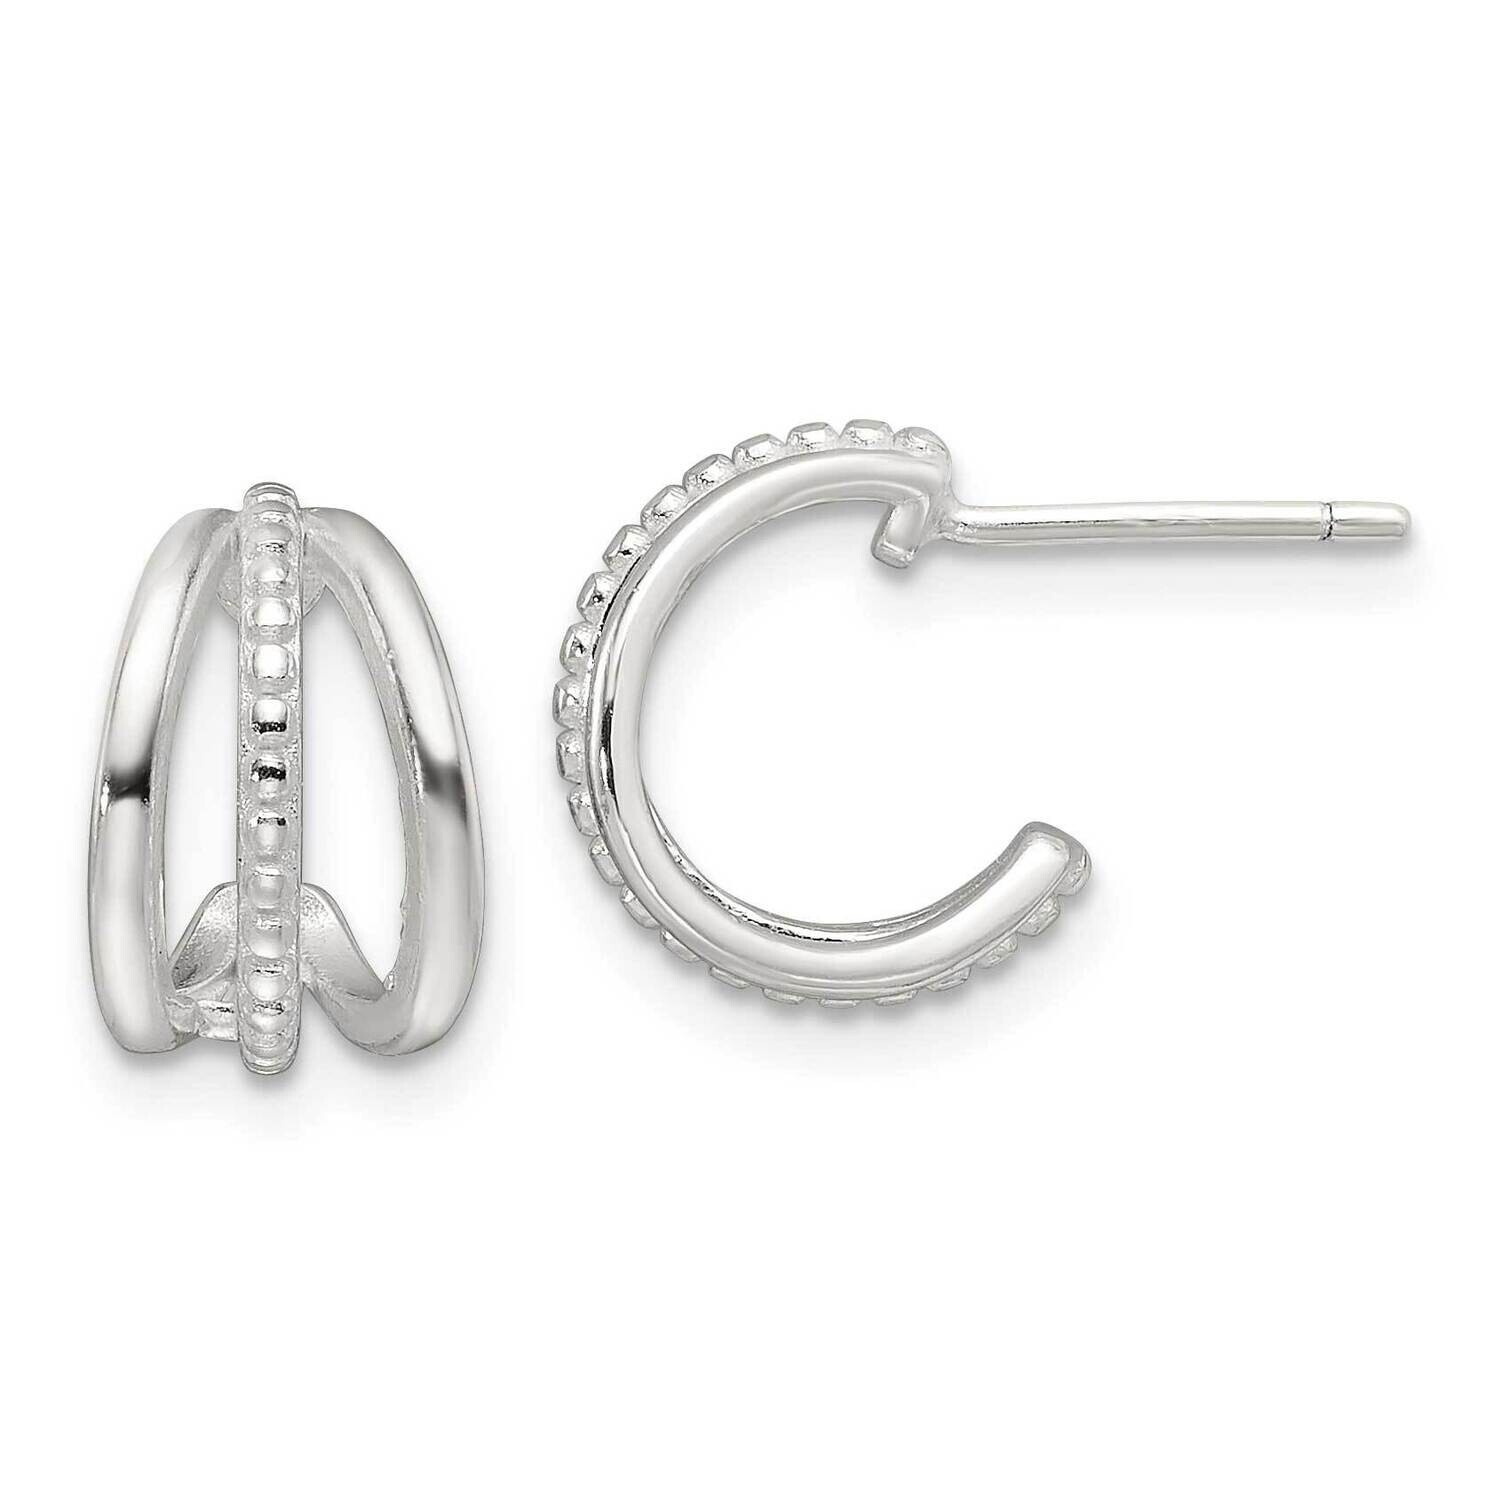 E-Coating Polished Textured C-Hoop Earrings Sterling Silver QE16987